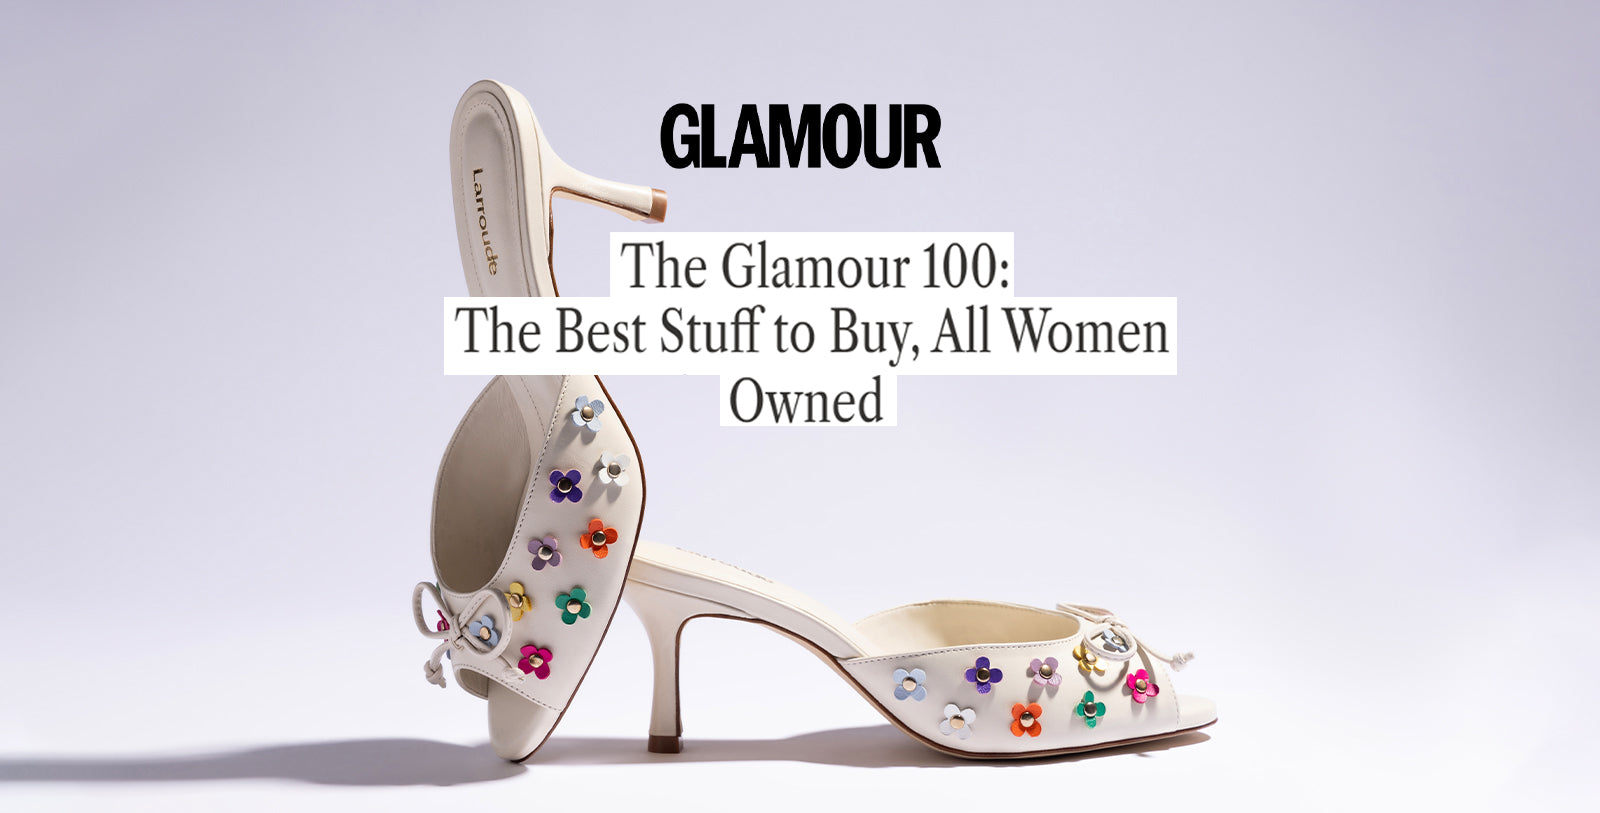 The Glamour 100: The Best Stuff to Buy, All Women Owned